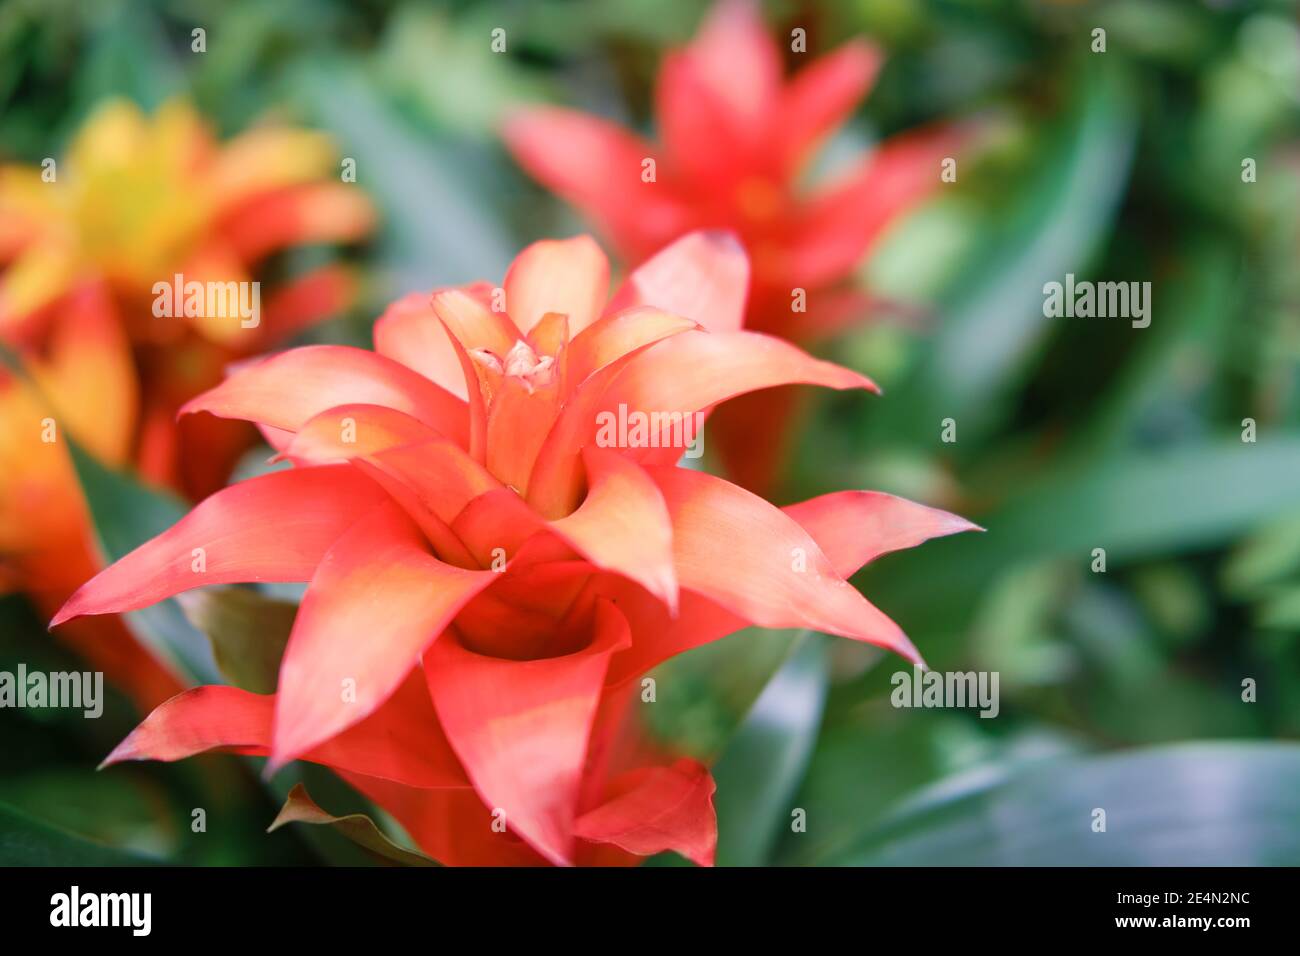 Red bromelia flower, copy space for text. Bromelia is a genus of plants in the Bromeliaceae family that includes about 50 species native to tropical a Stock Photo